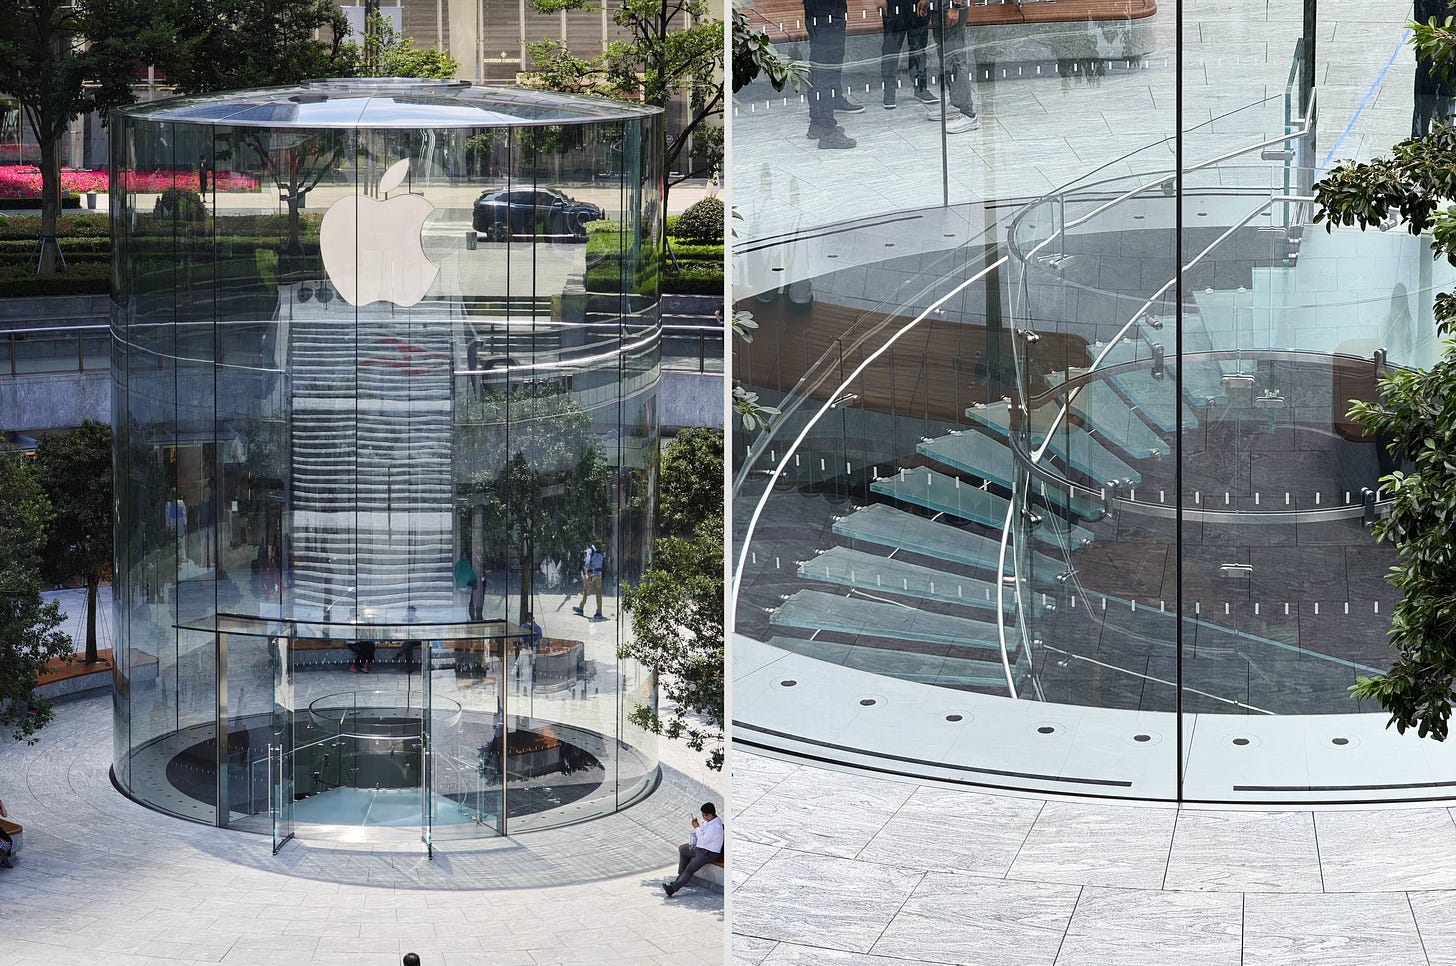 A Split View showing the new glass drum entrance to Apple Pudong and a closeup that details the seam where the glass panels meet the plaza and each other.